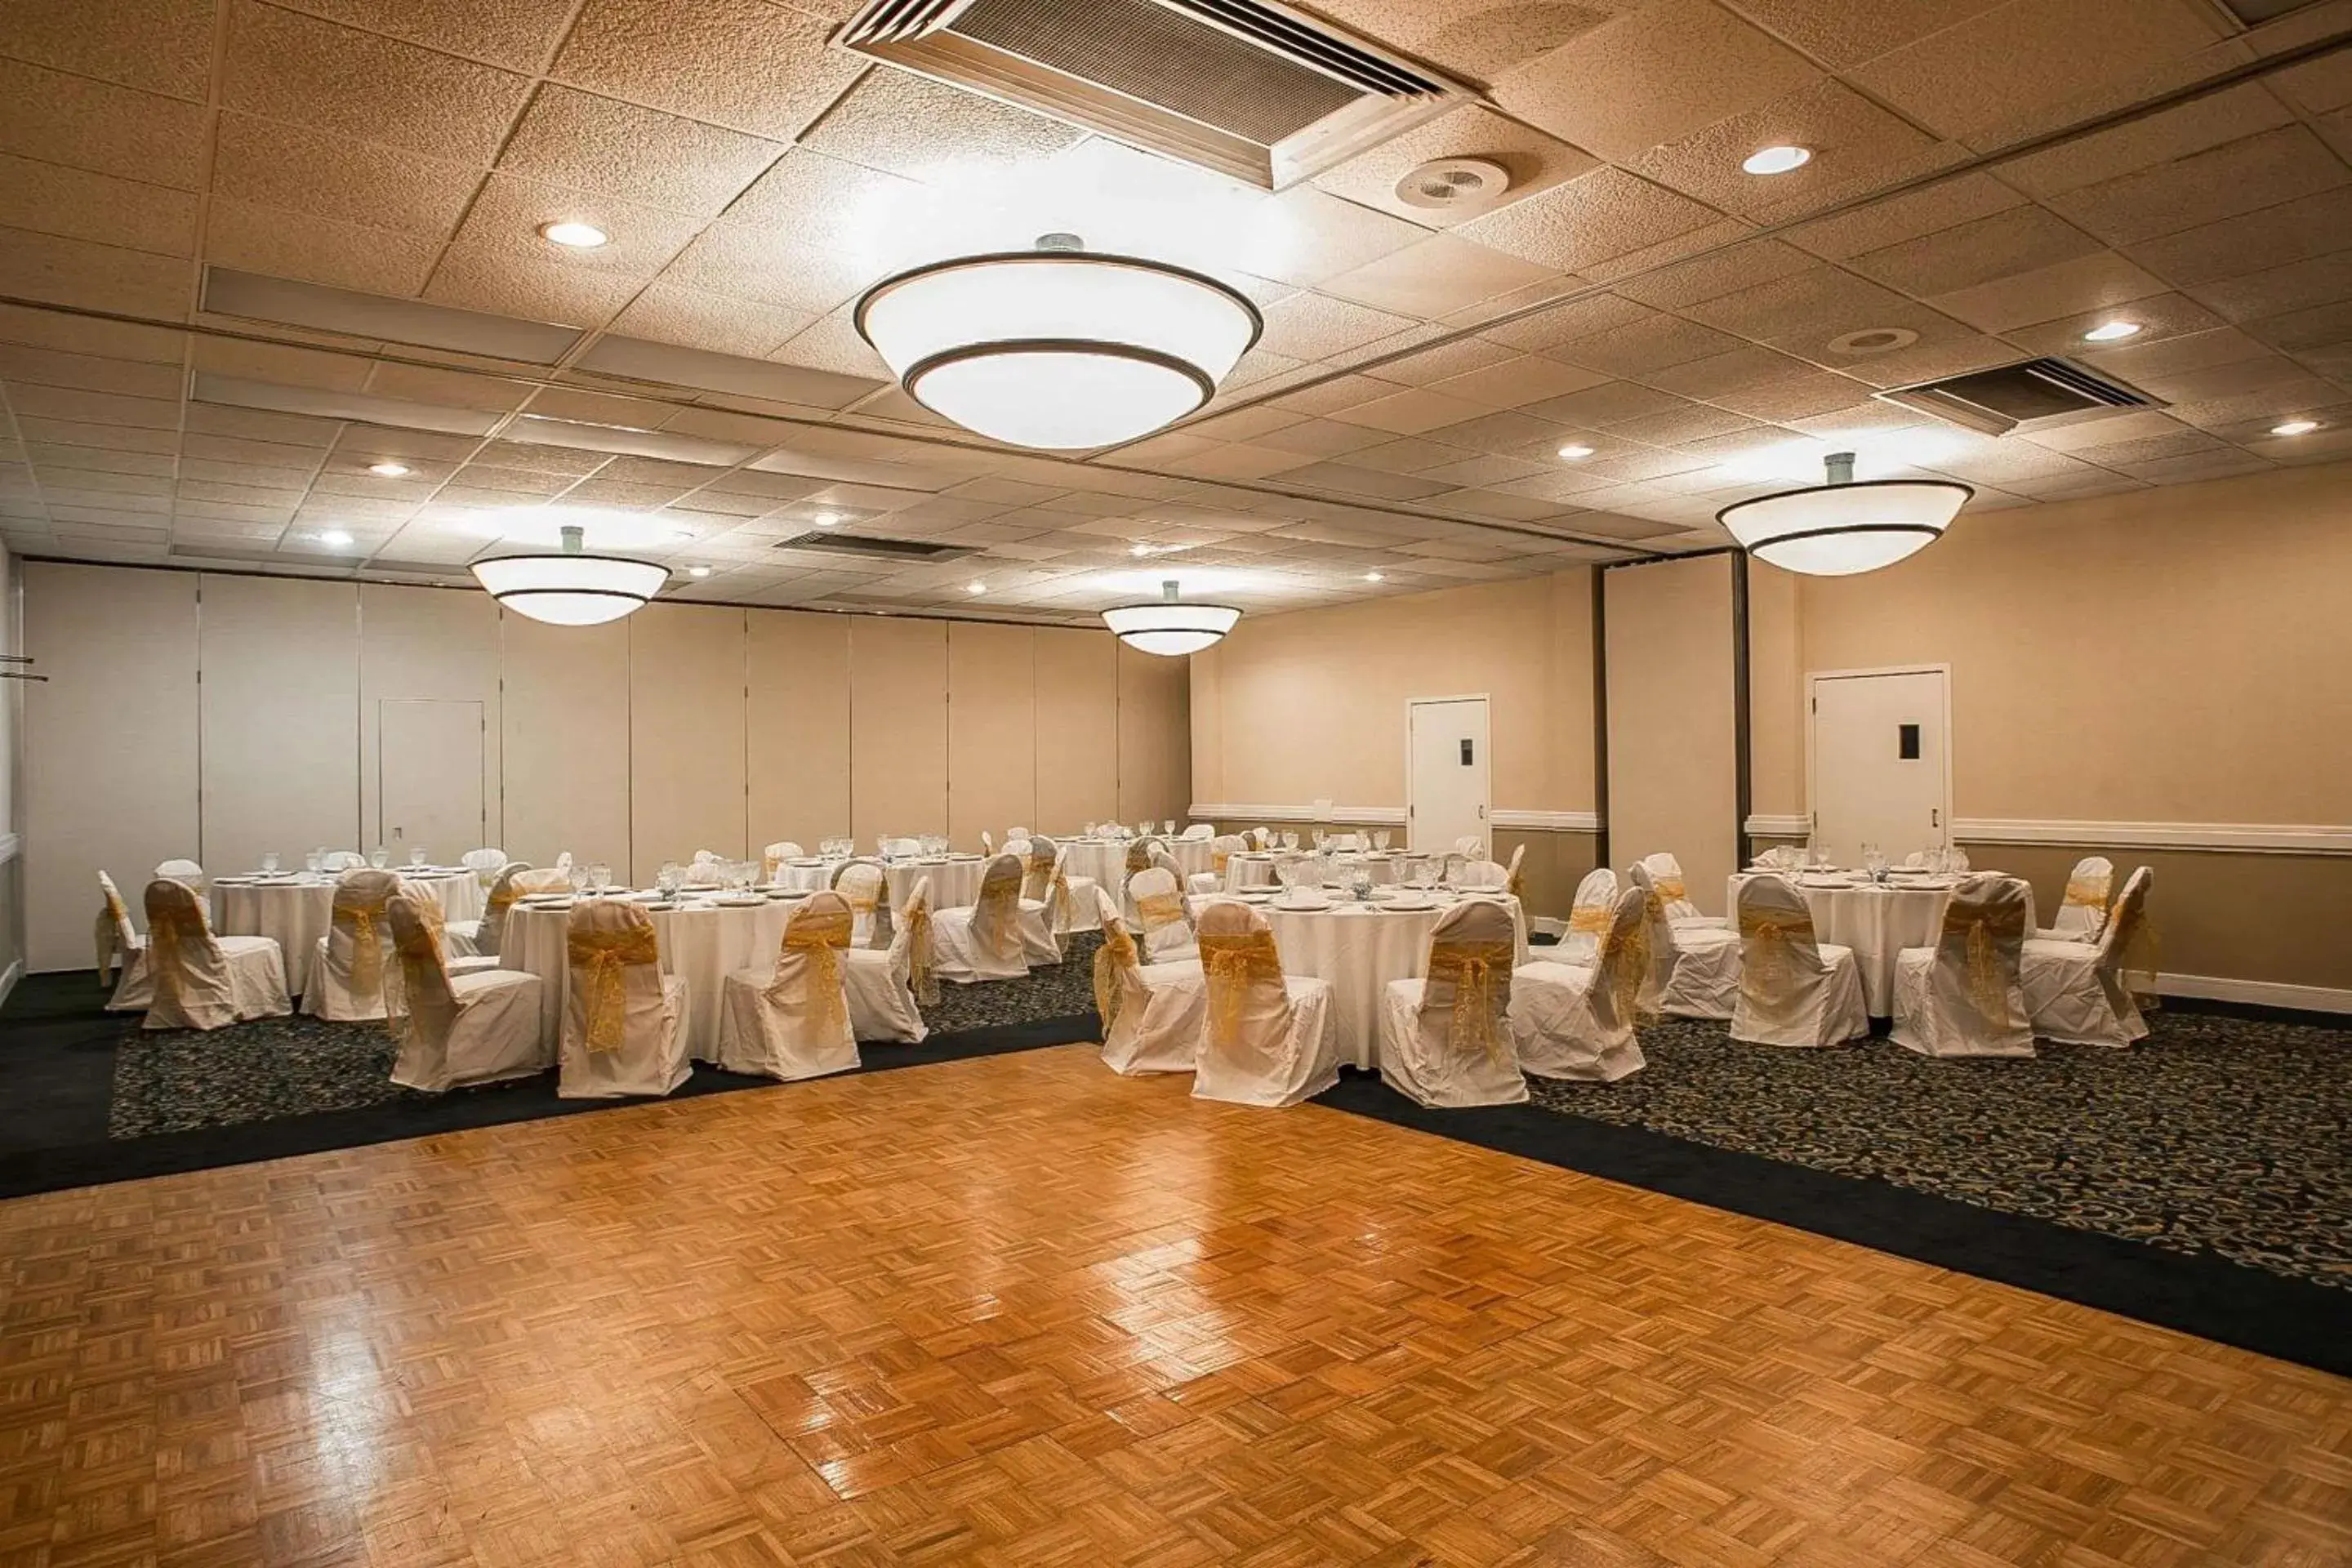 On site, Banquet Facilities in Quality Inn Sumter